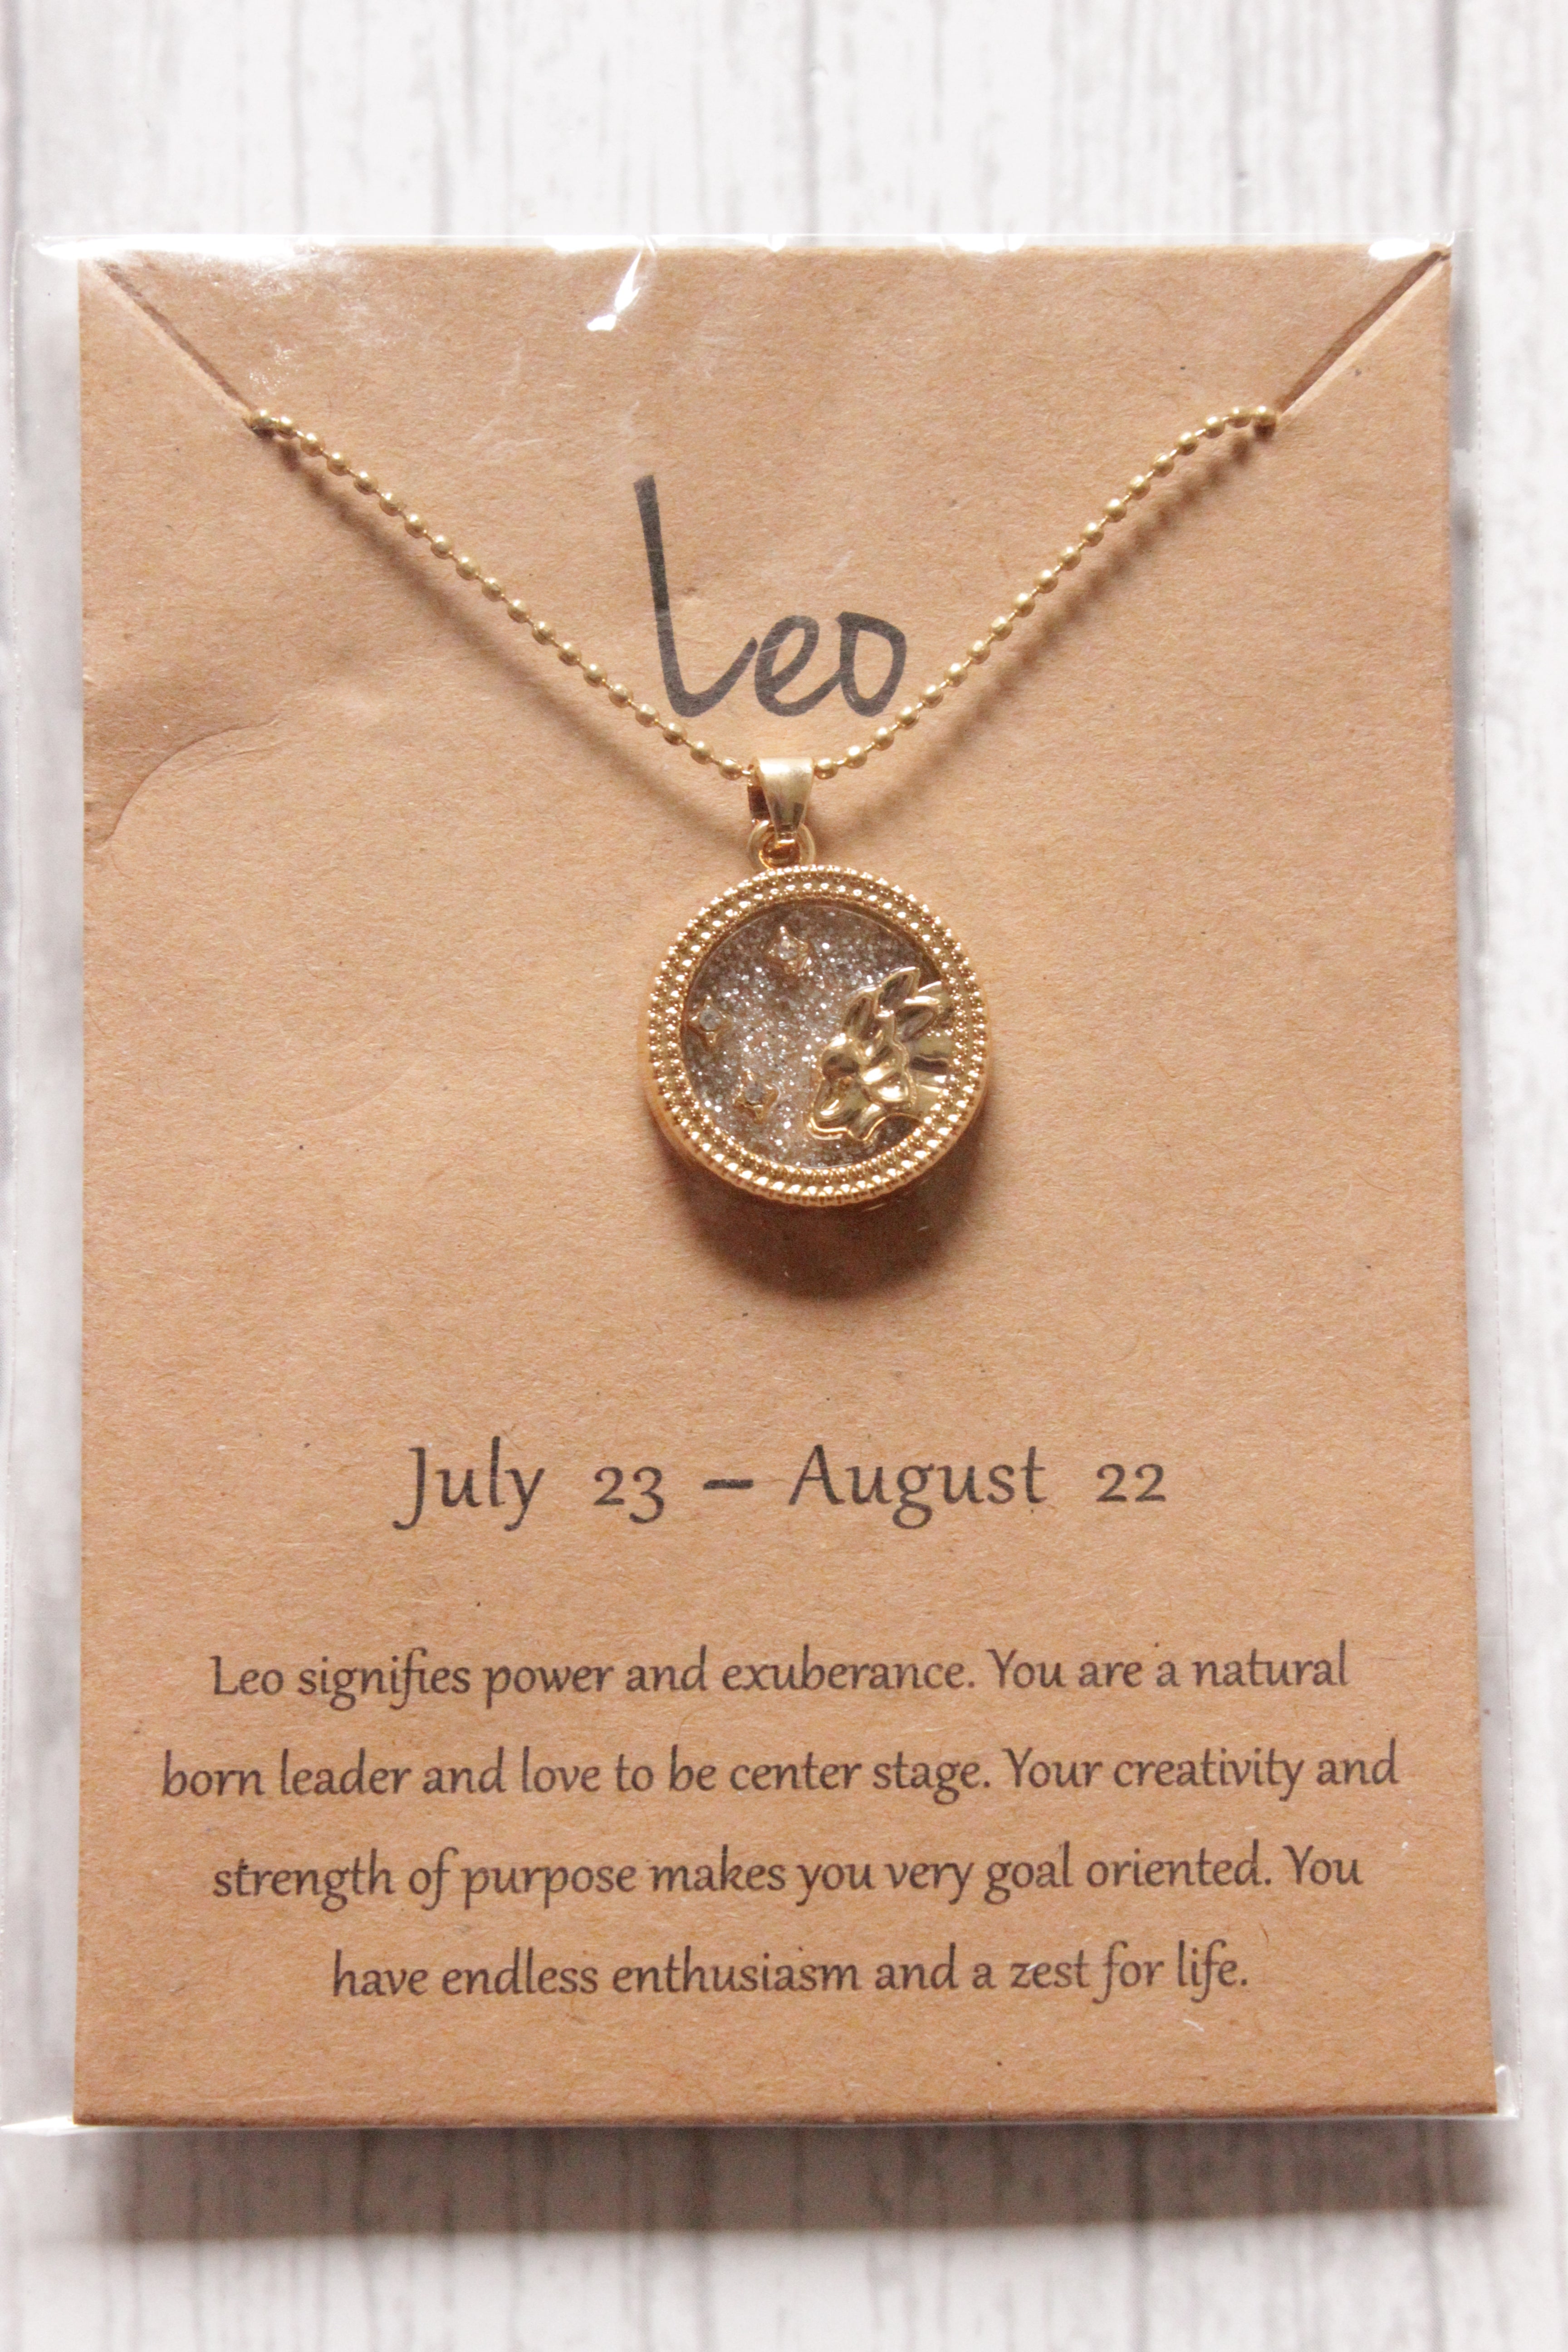 Leo Sun Sign Gold Plated Day Style Round Resin Horoscope Astrology Minimalist Pendant Necklace with Card